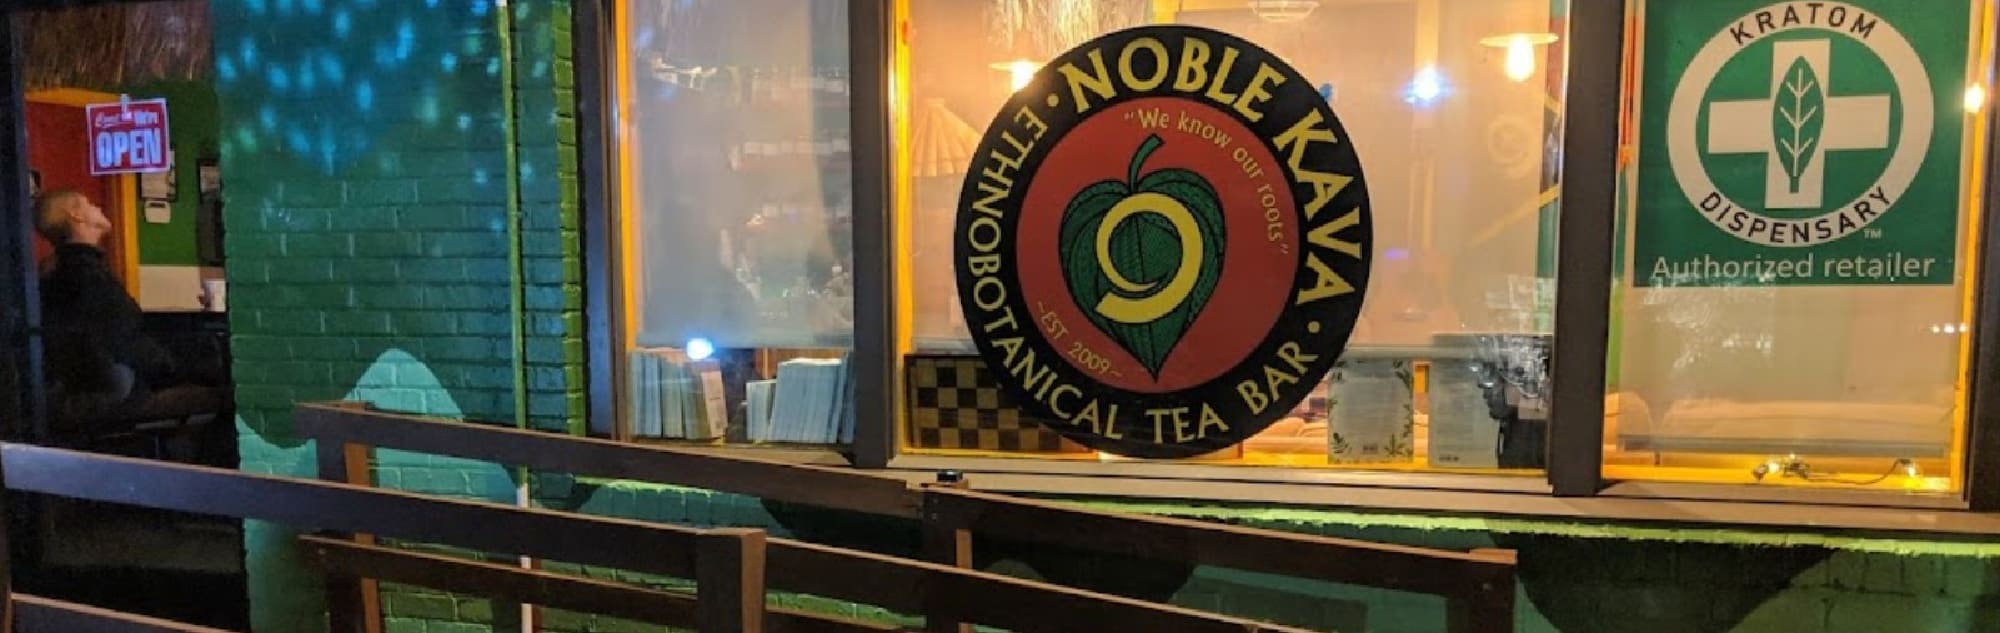 image of noble kava ethnobotanical tea bar in knoxville tennesse